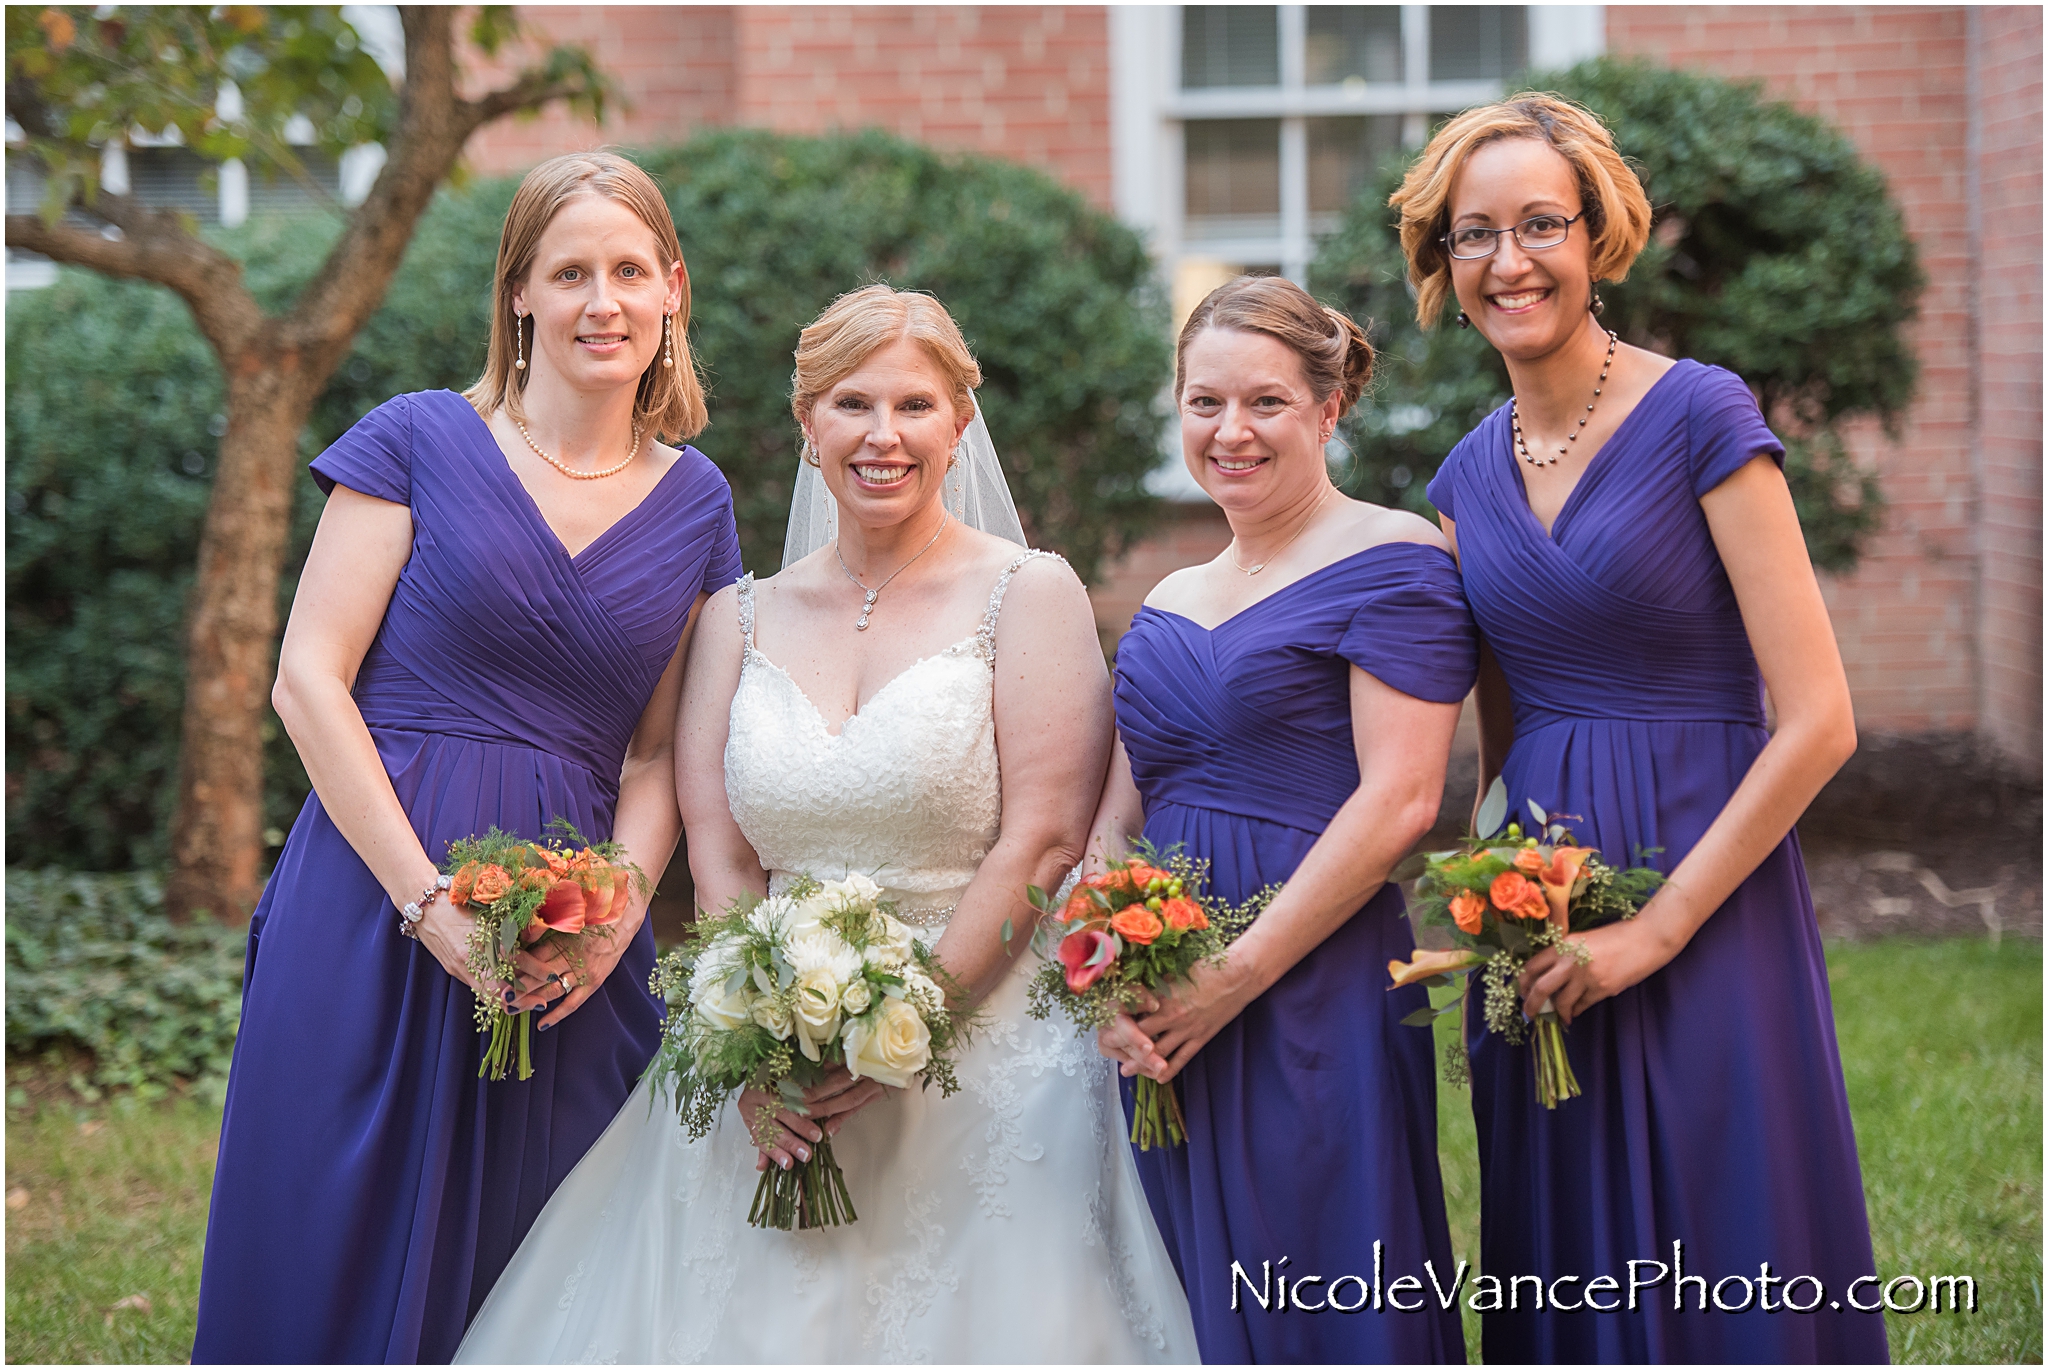 The beautiful bridal party before the wedding ceremony.